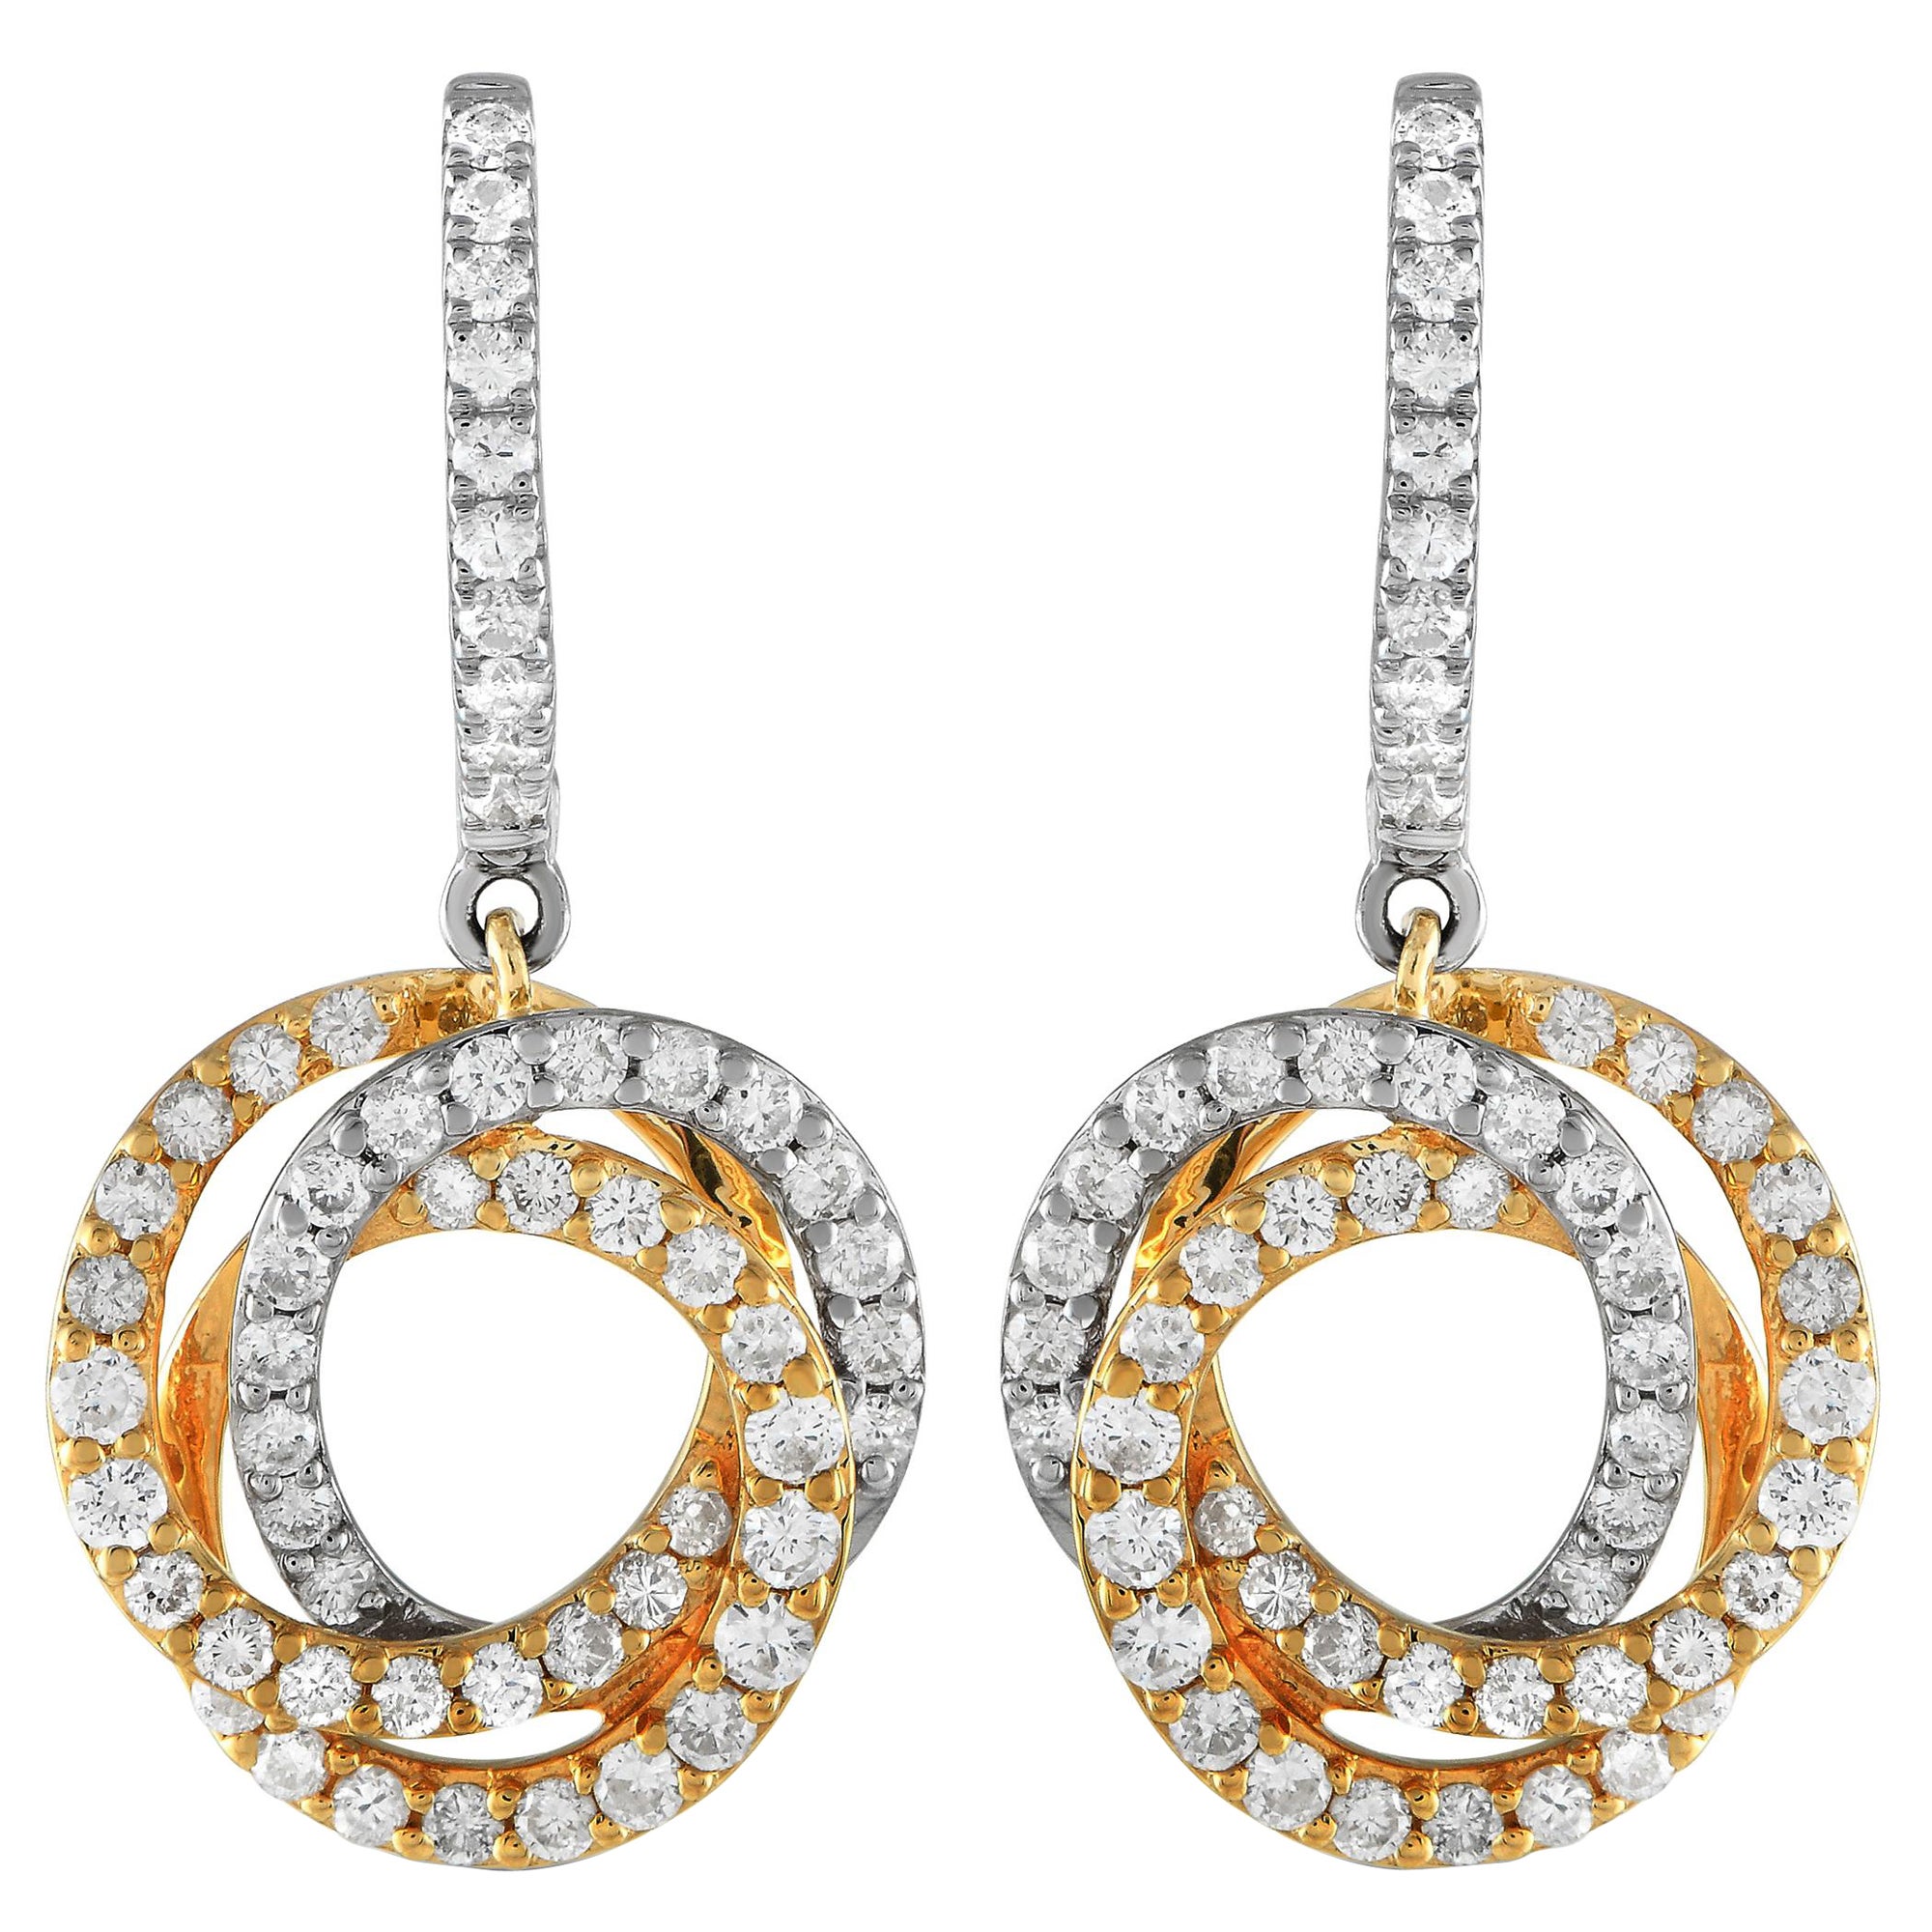 18K White and Yellow Gold 1.0ct Diamond Circle Drop Earrings AER-13233-WY For Sale